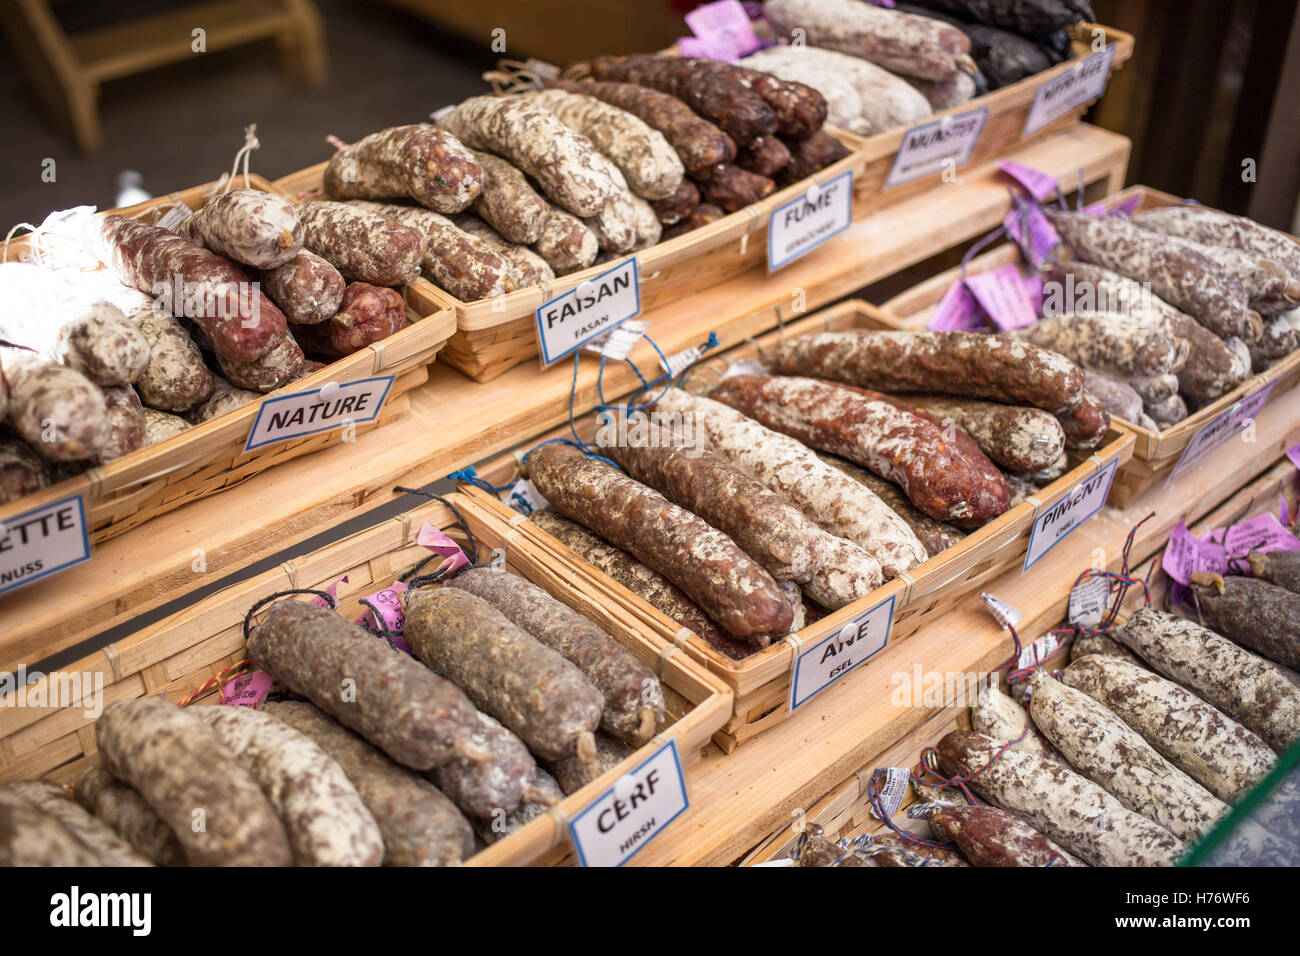 Sausages on sale in Eguisheim, Alsace region of North Eastern France Stock Photo